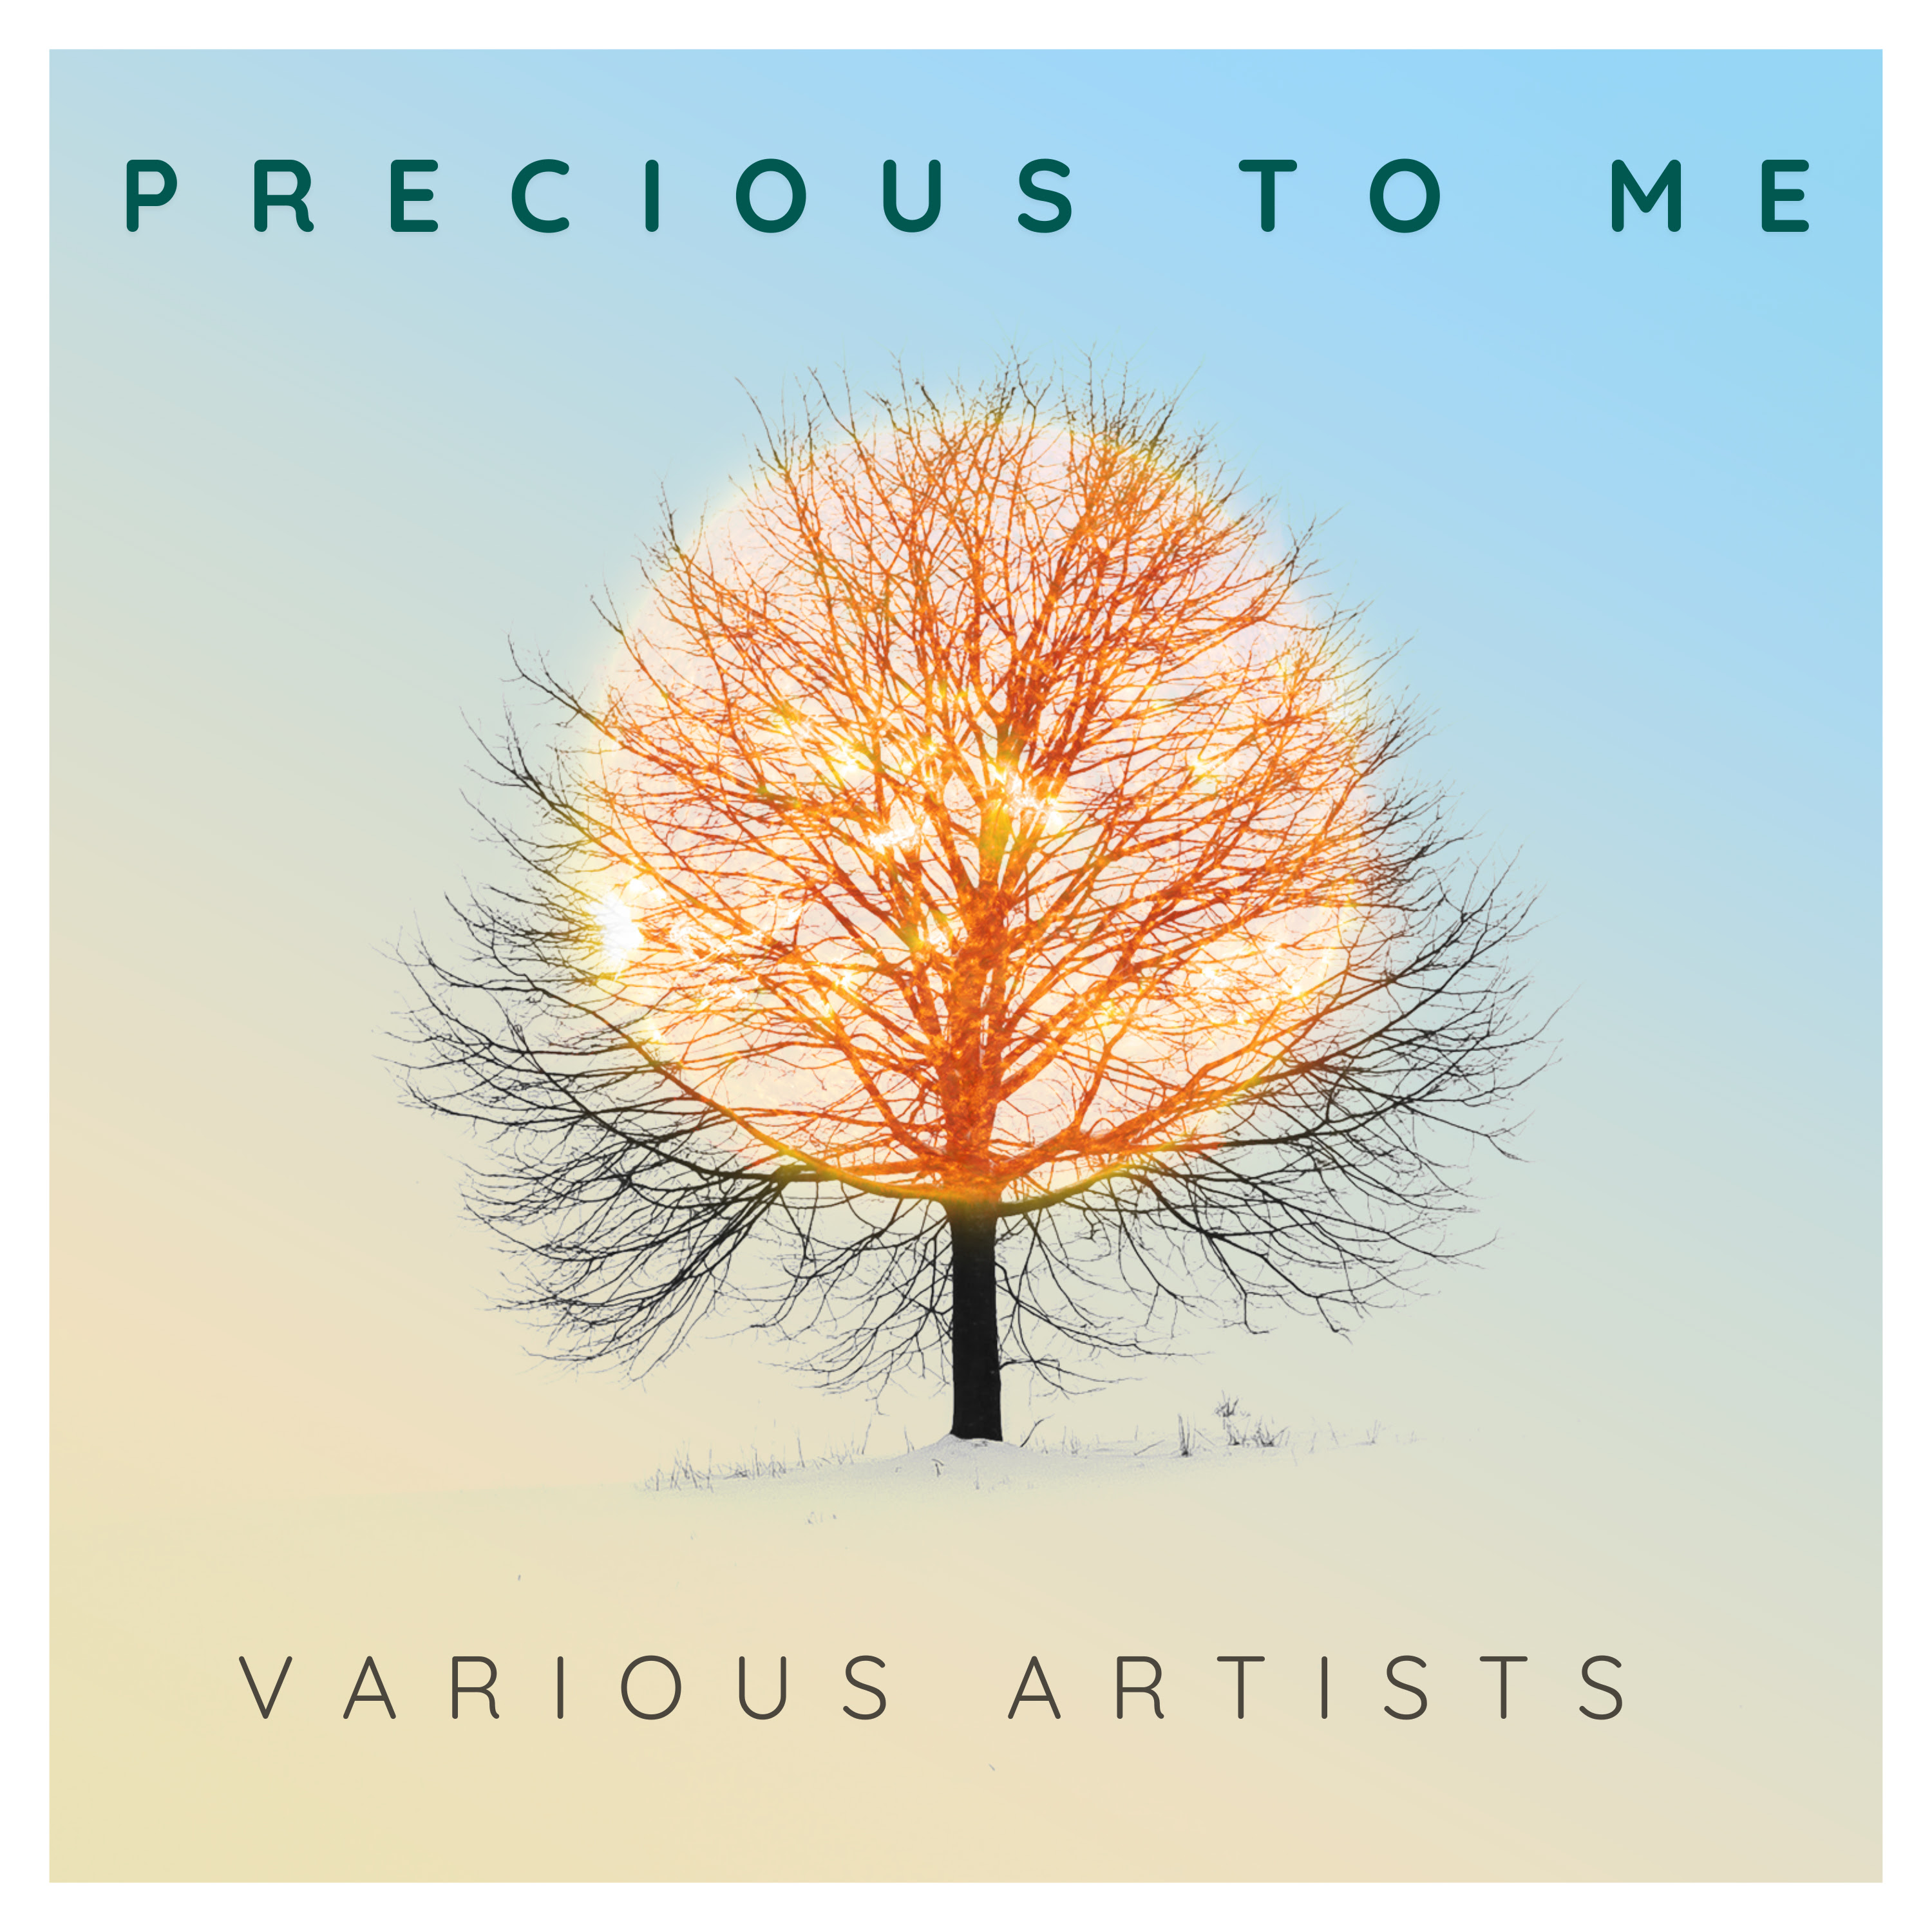 Blue Élan Records Releases Charity Album "Precious to Me" Benefiting The Alliance for Children's Rights